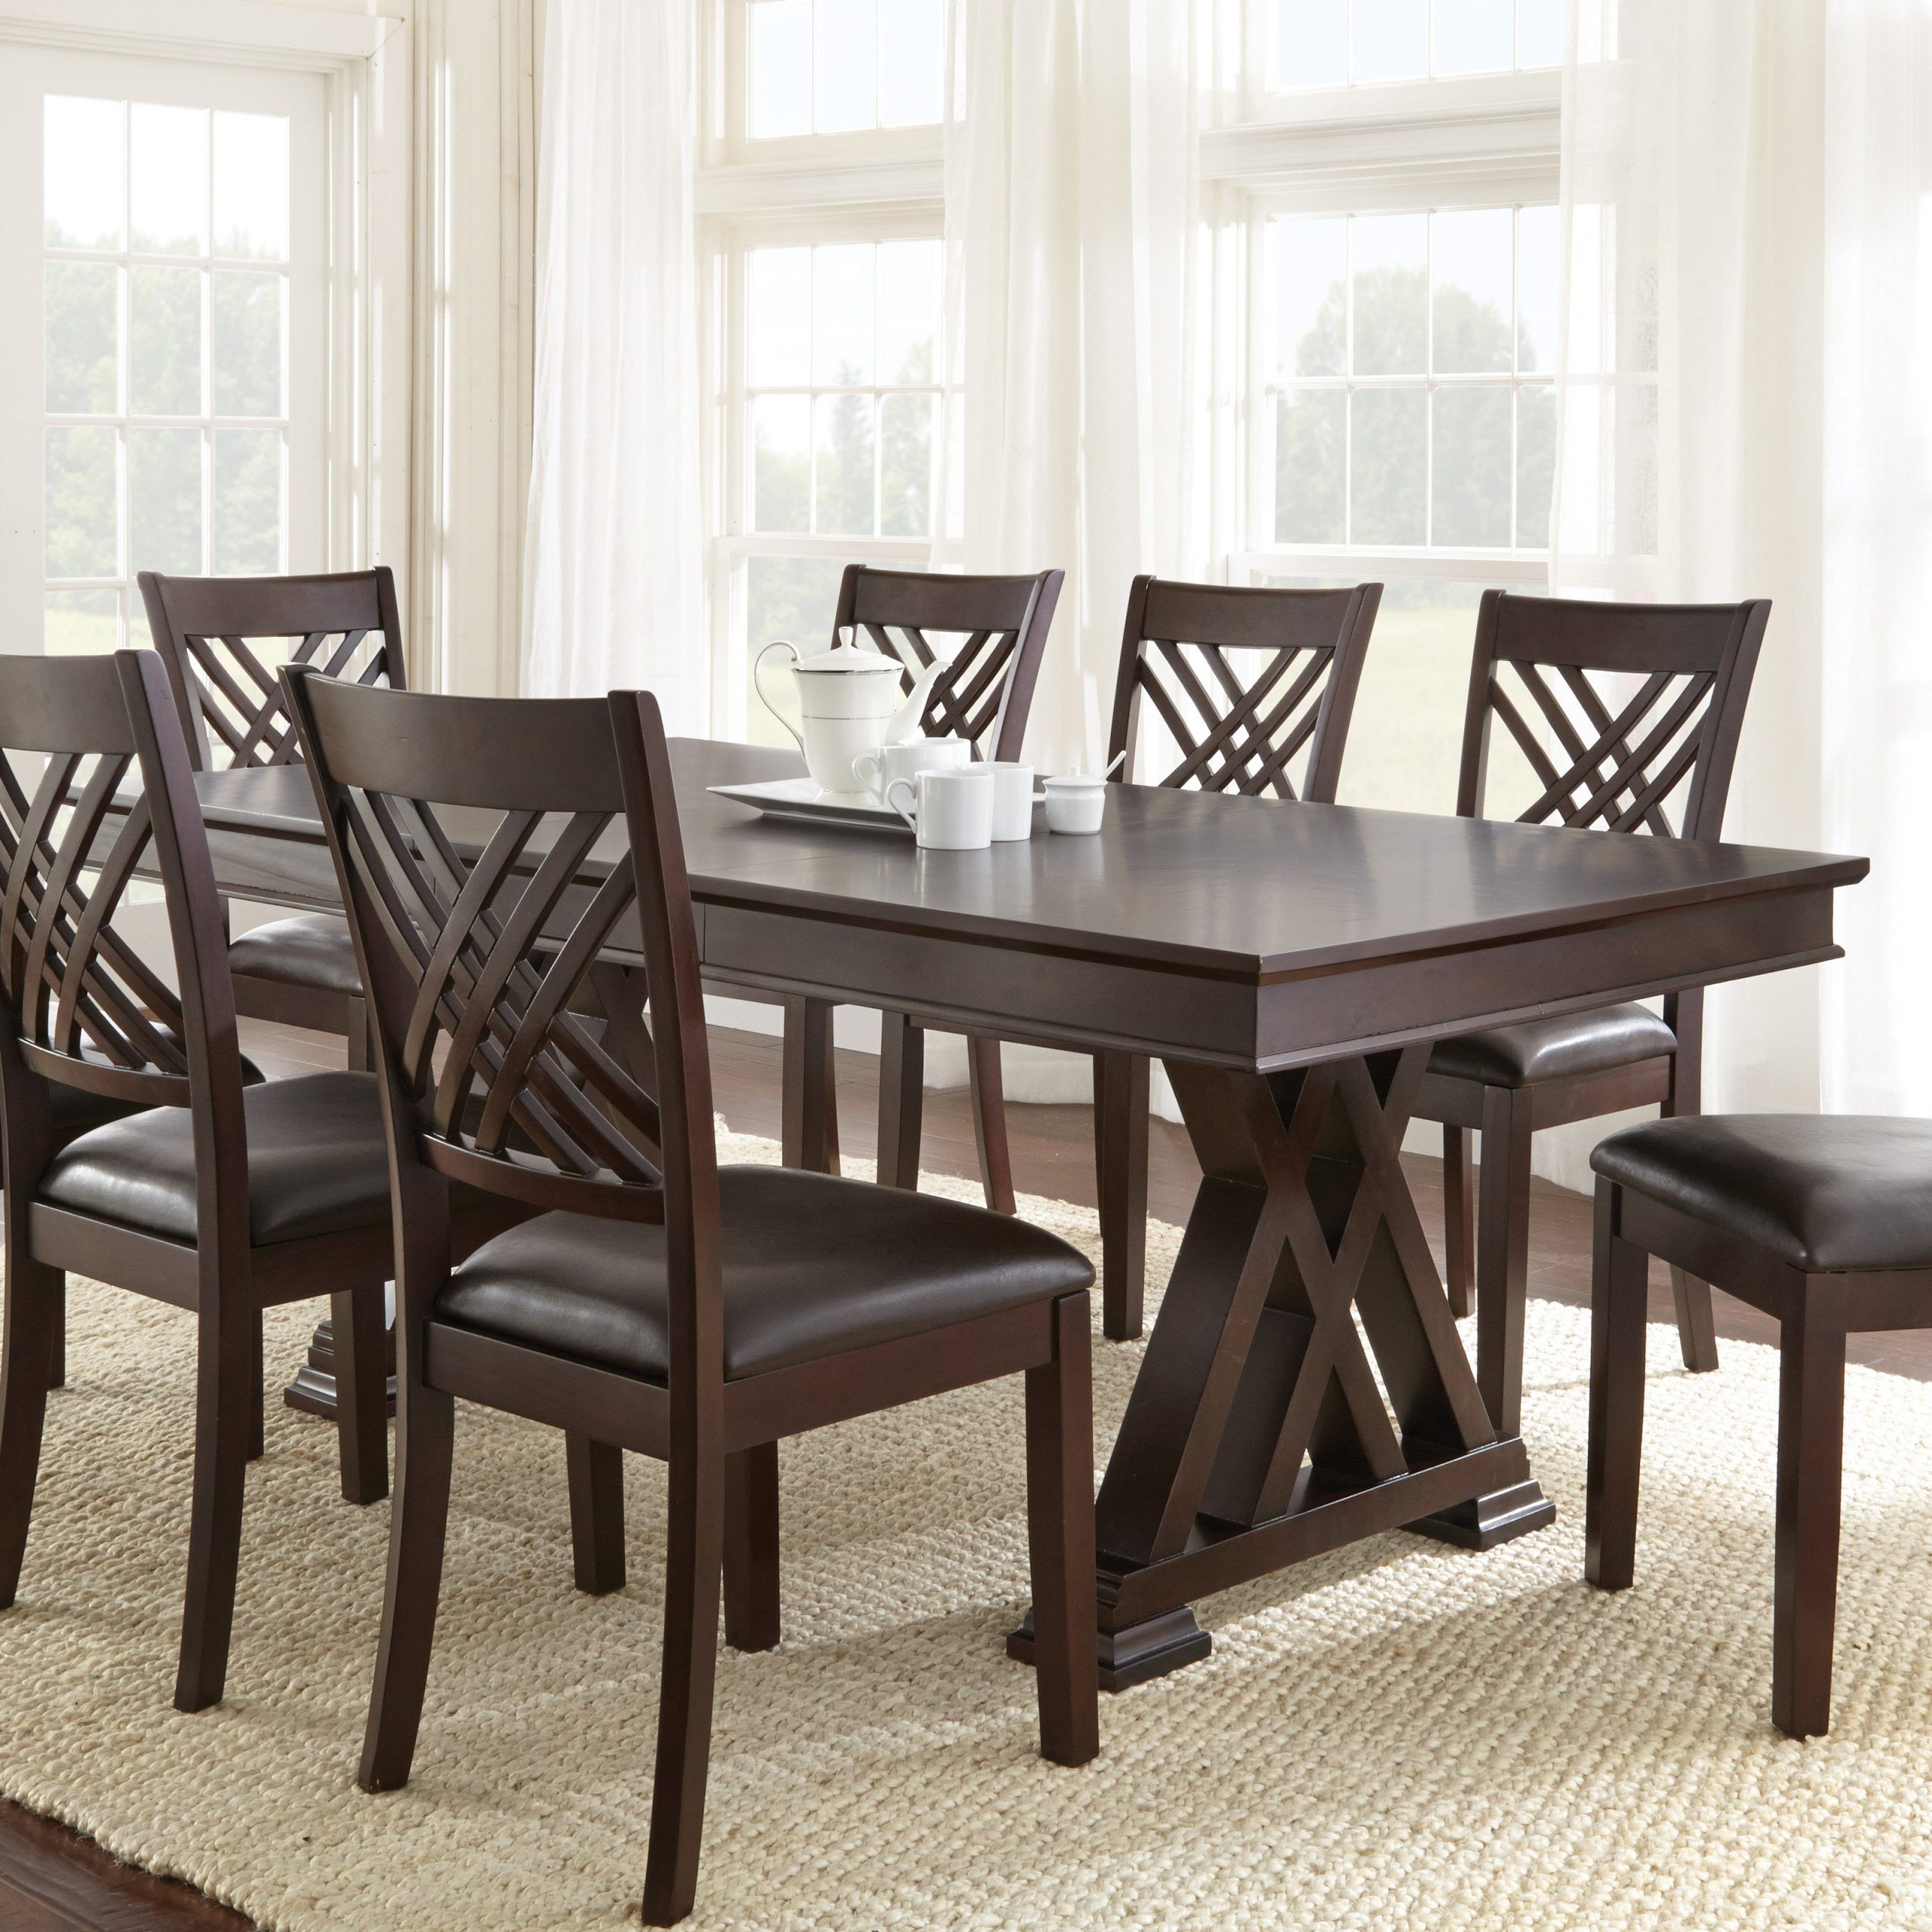 Steve Silver Adrian Dining Table – Dining Tables At Hayneedle With Current Silver Dining Tables (View 1 of 20)